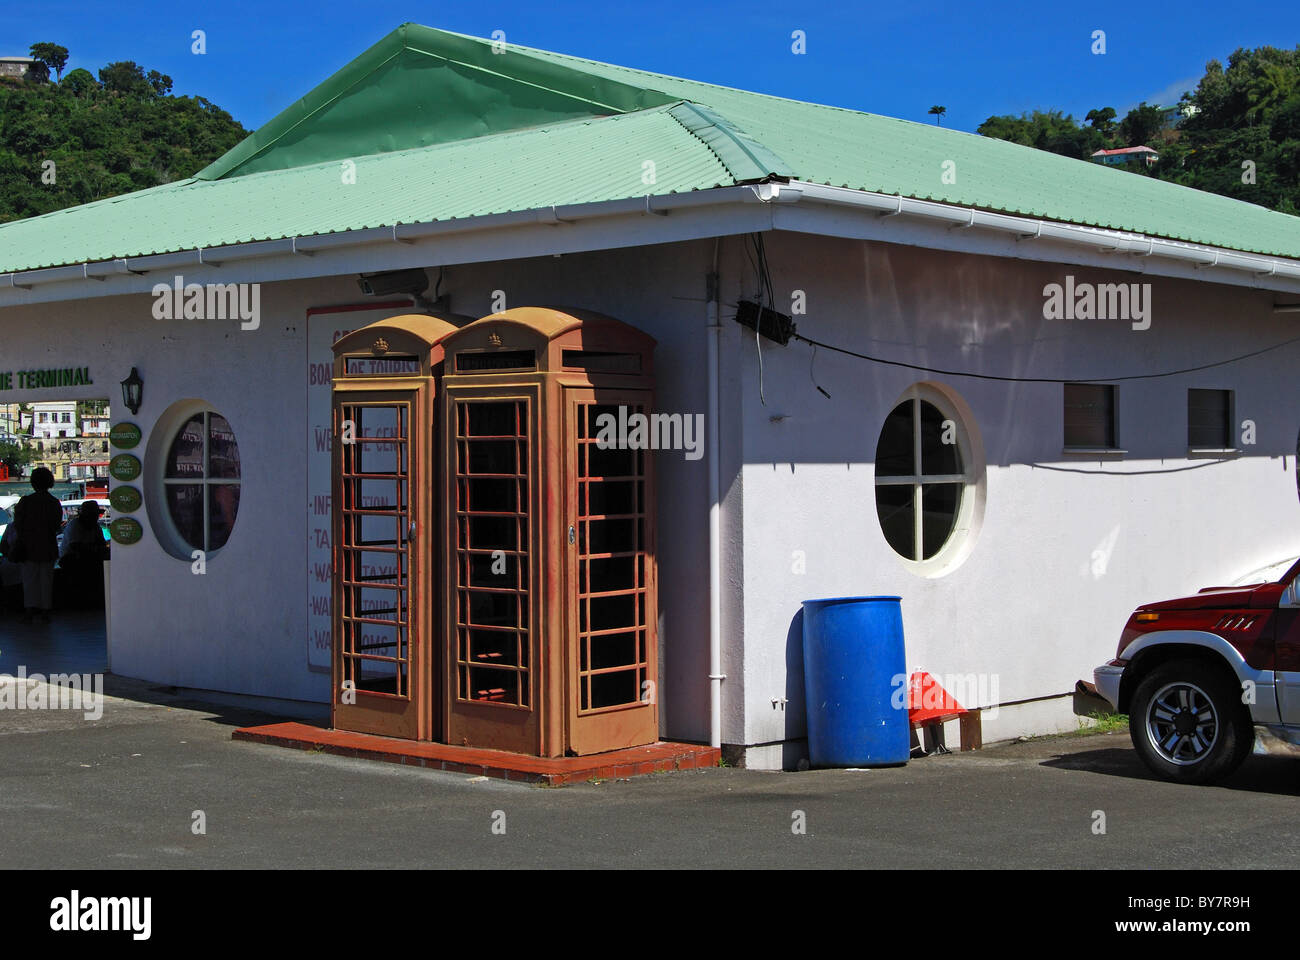 Two old and faded English red telephone boxes outside building, St. George's, Grenada, Caribbean. Stock Photo